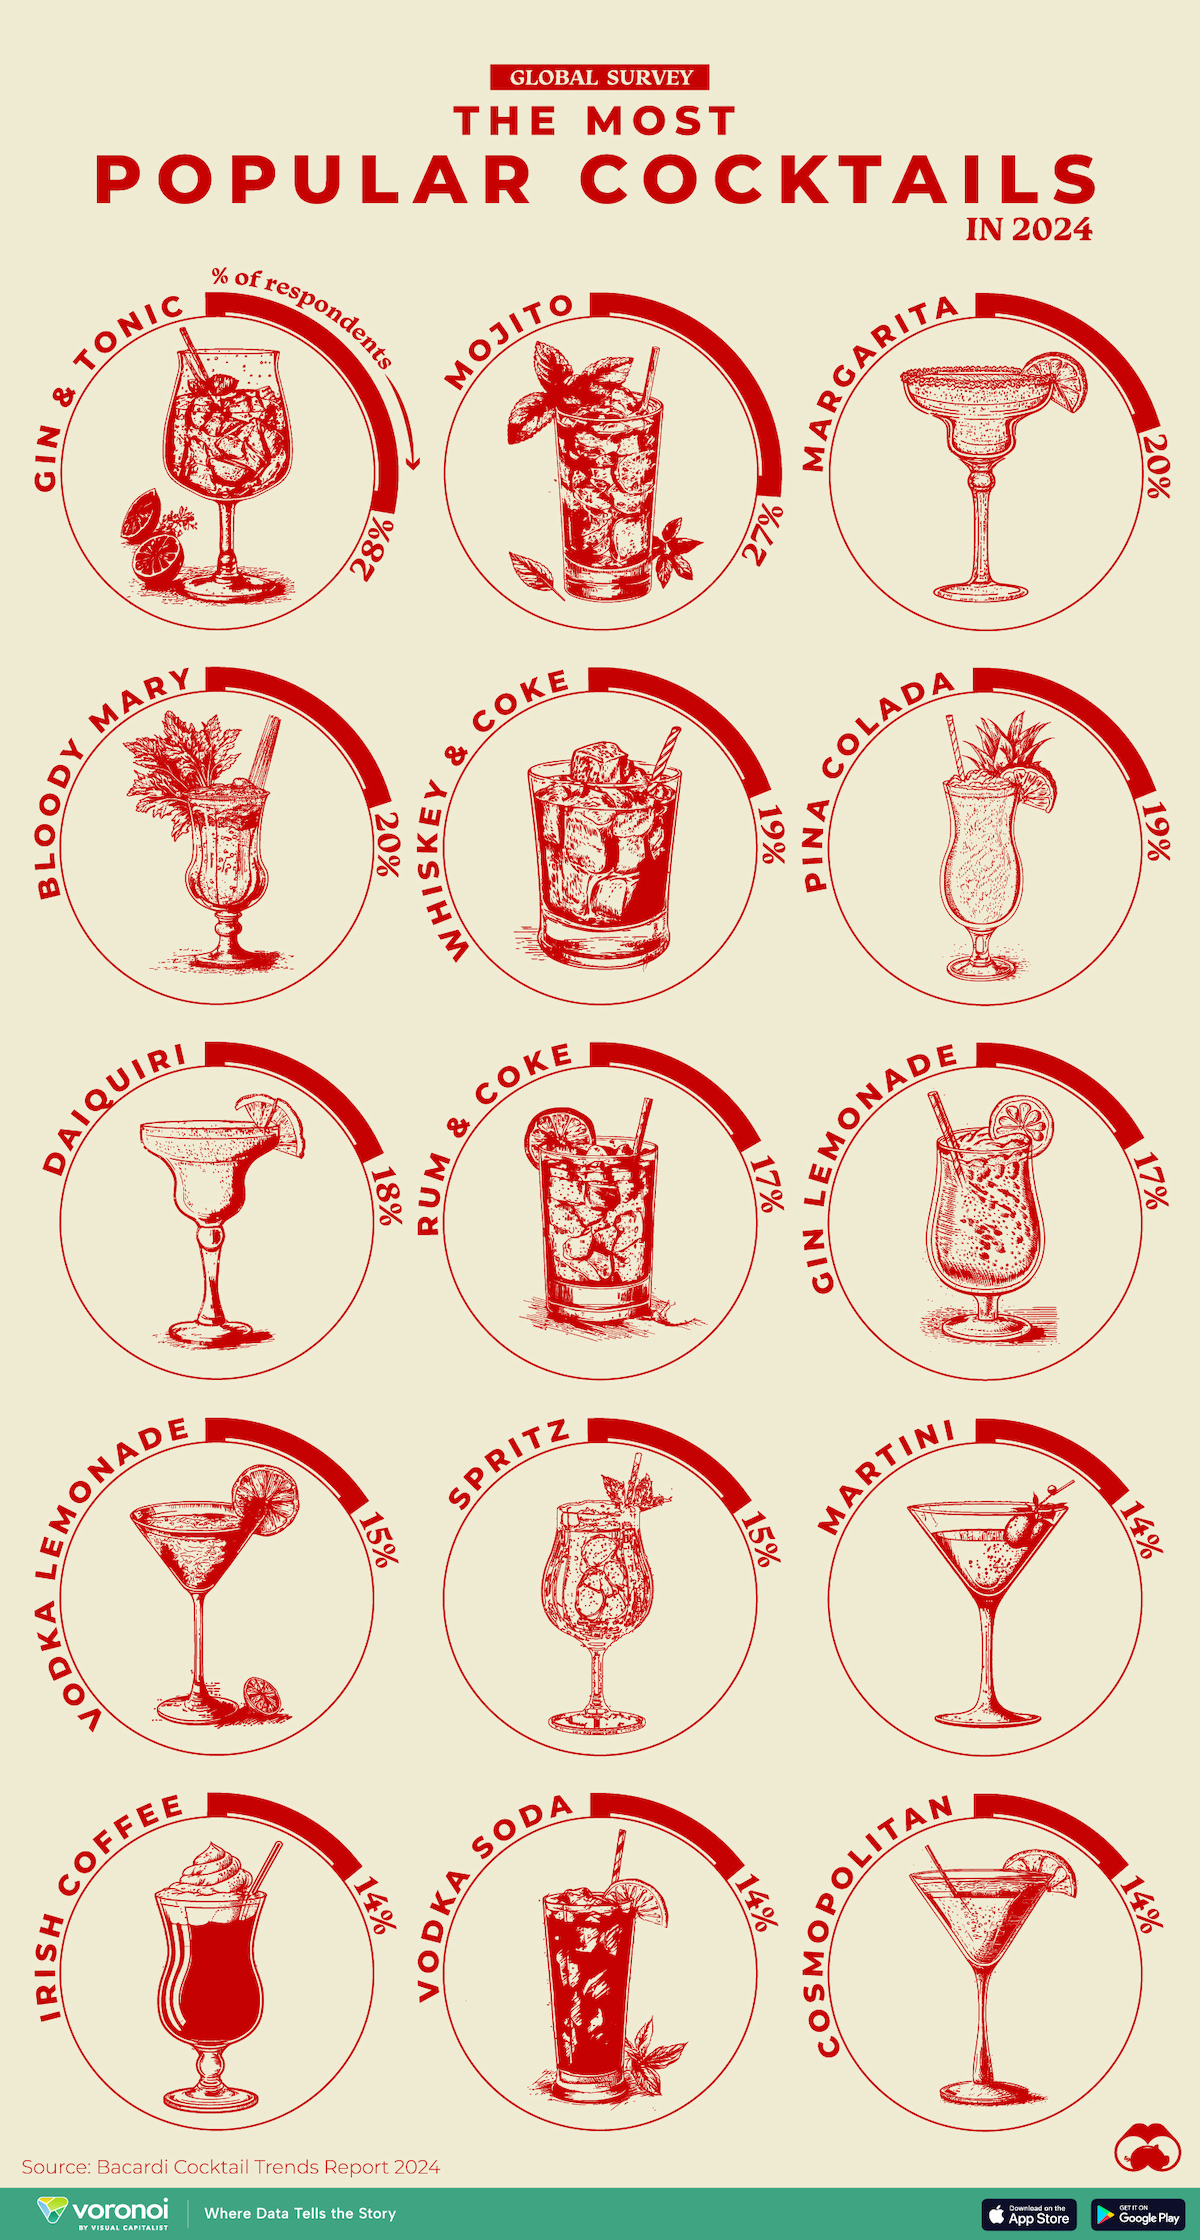 A chart ranking the most popular cocktails by percent of respondents who picked them in a global Bacardi survey in 2023.